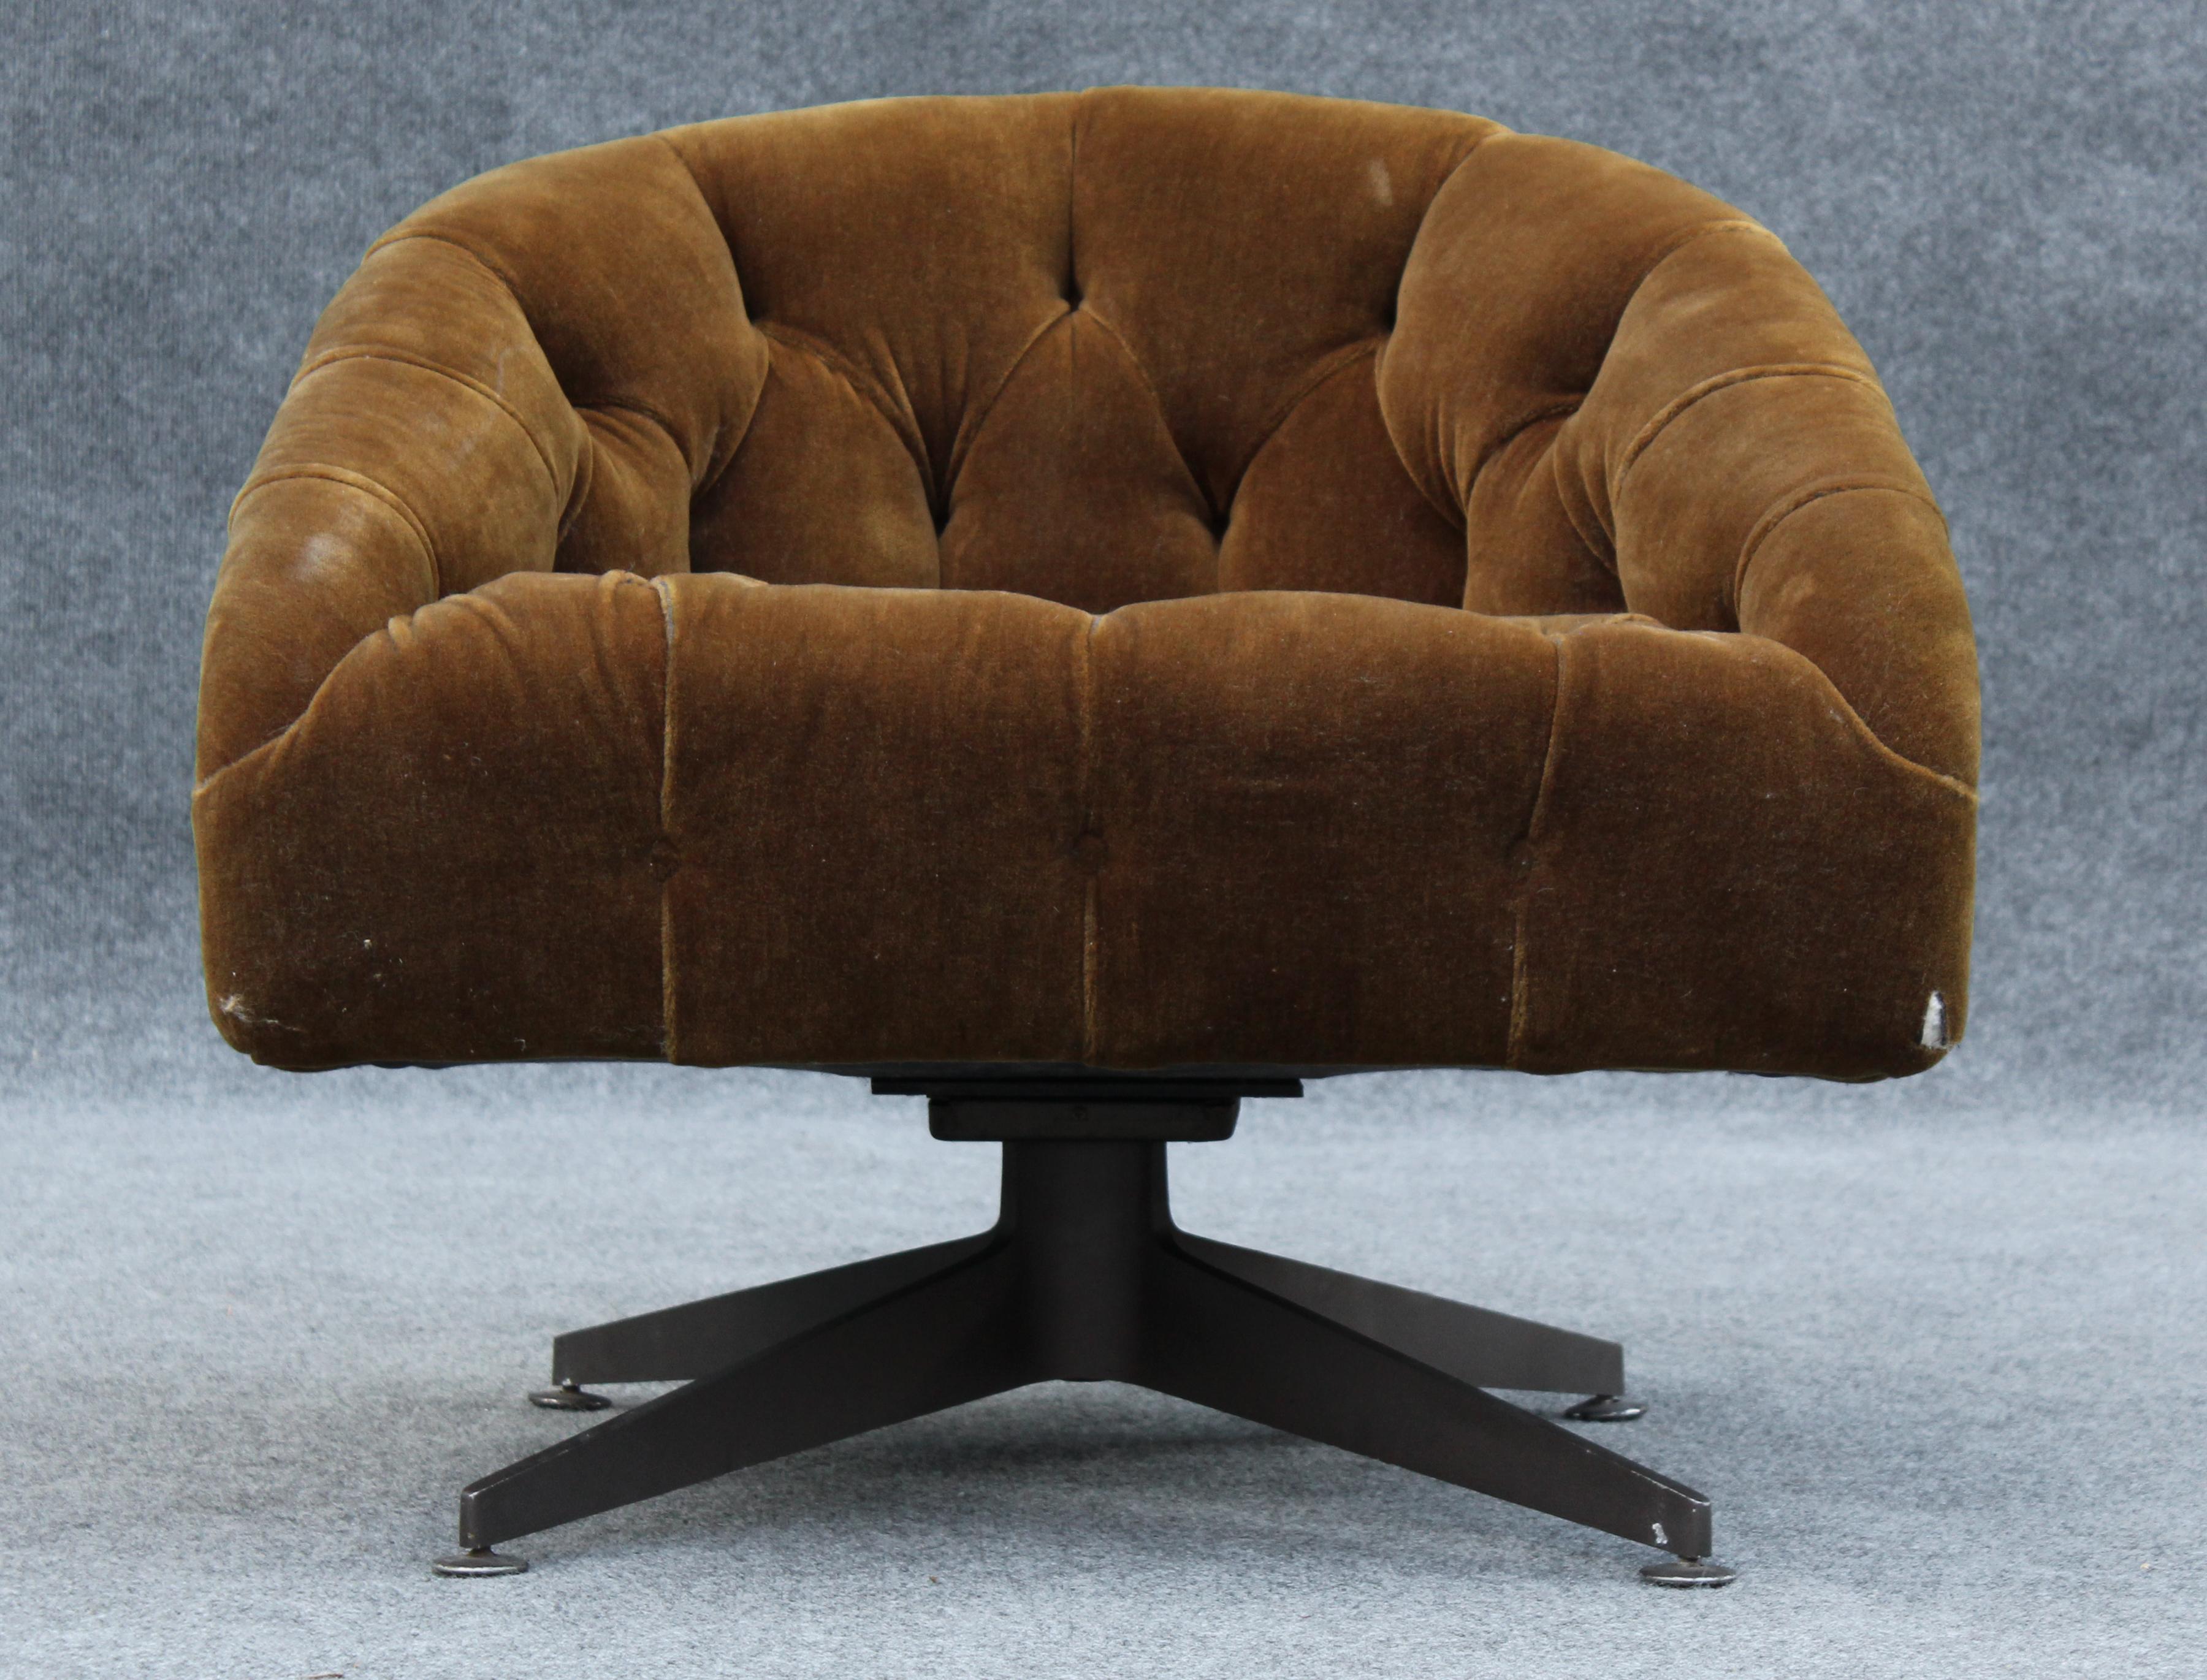 By legendary American designer Ward Bennett, this swivel lounge chair was produced by manufacturer Lehigh Leopold, the manufacturer of choice for other design icons such as Warren Platner. Featuring its original mohair upholstry, it retains every